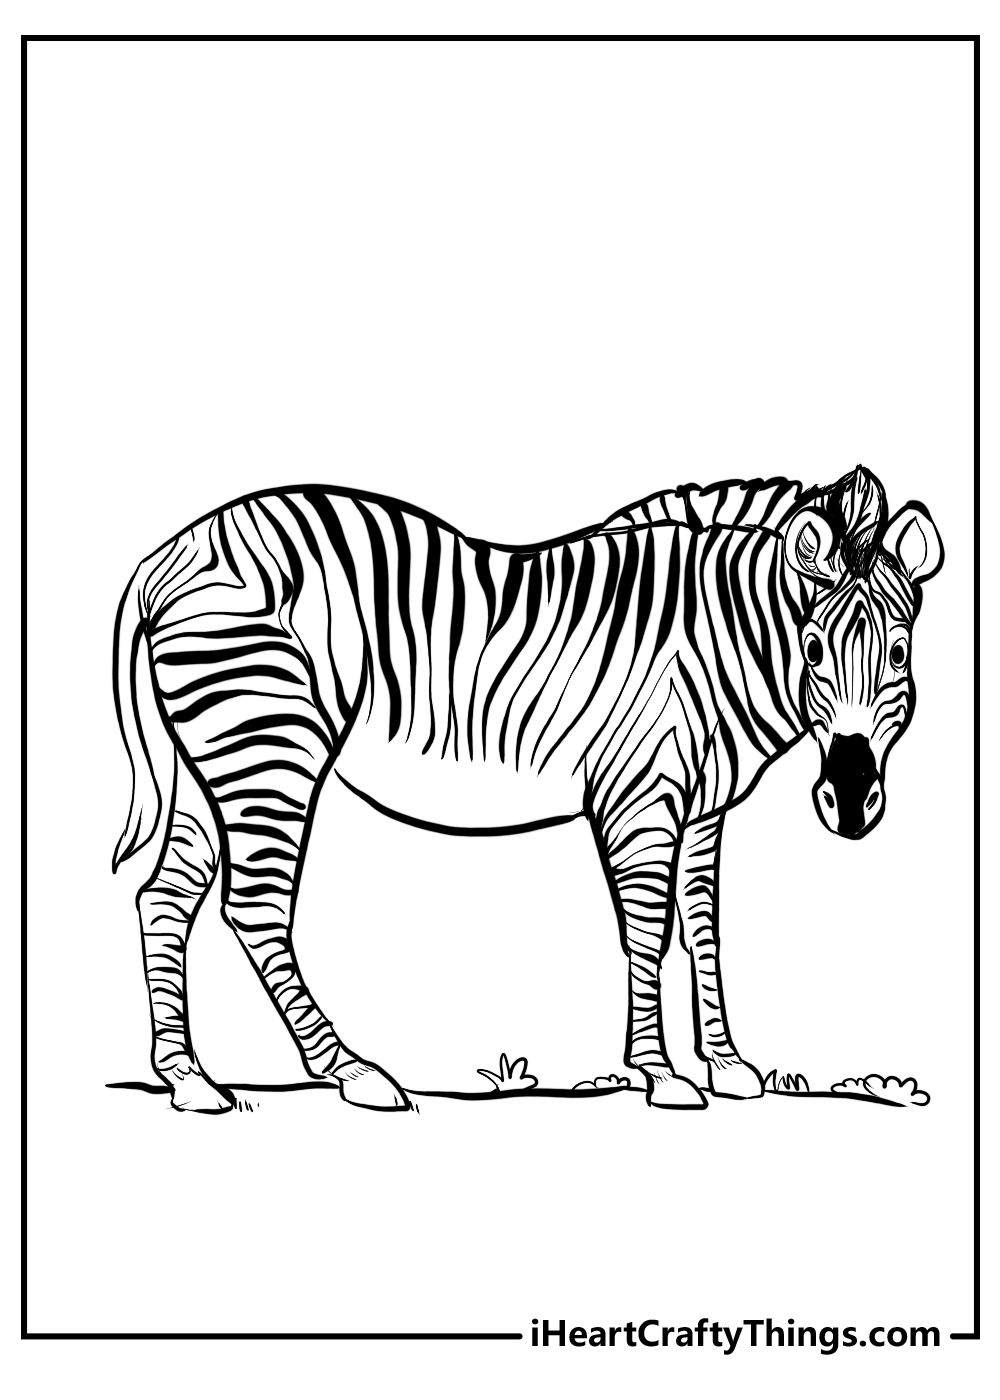 zebra coloring pages free download